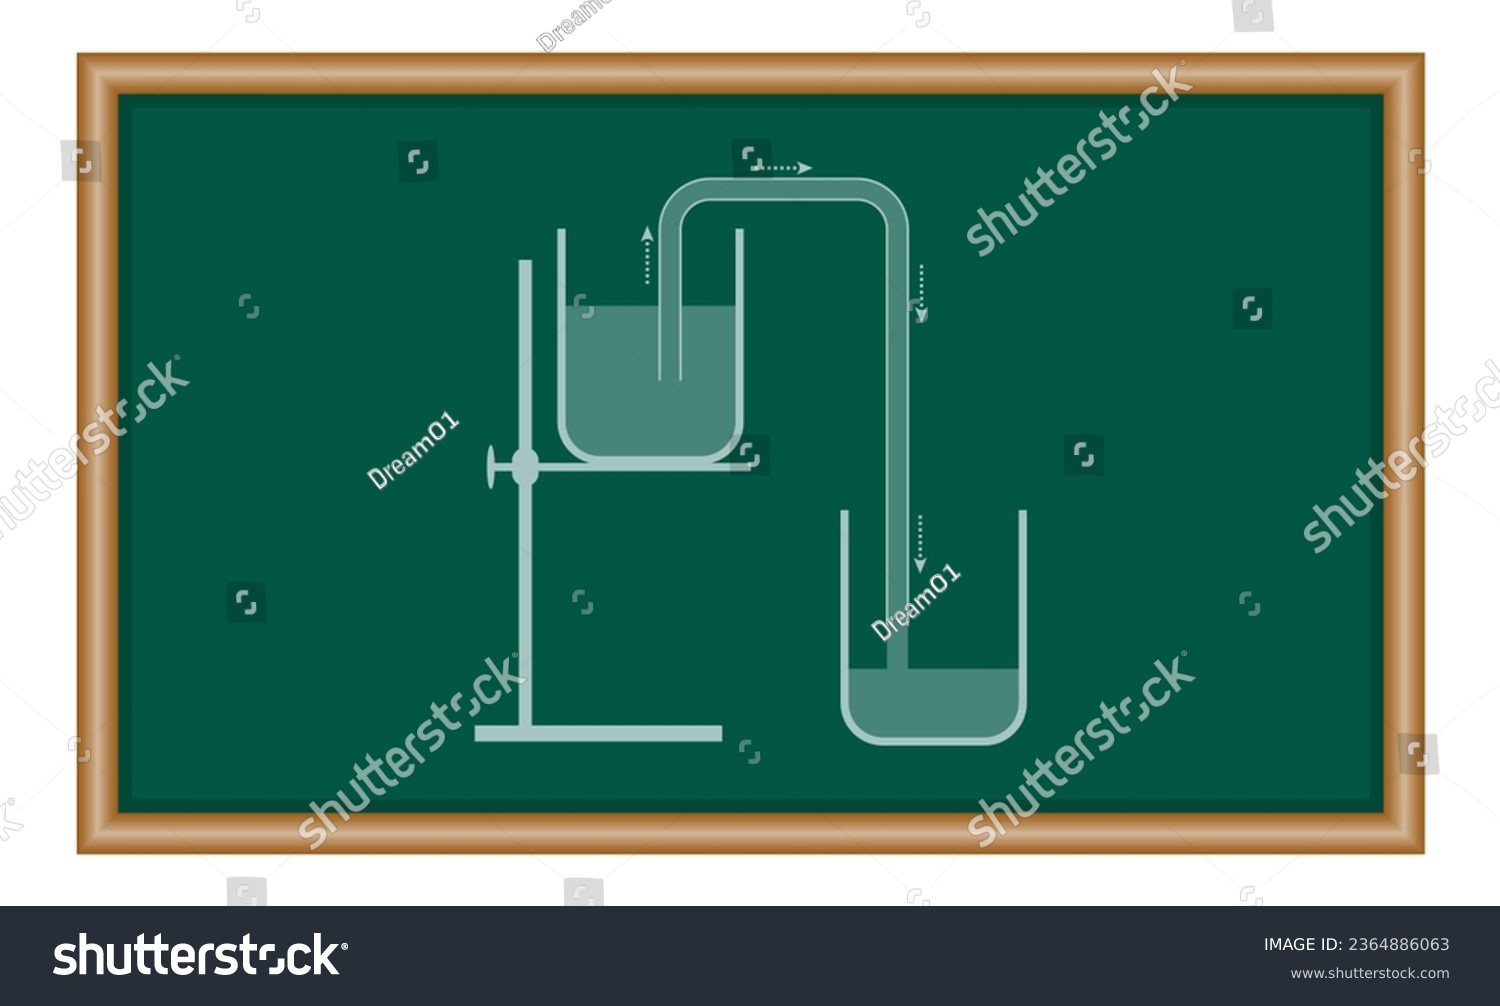 SVG of Simple liquid siphon physics principles. Siphon water from lower level to higher level. Scientific diagram. Physics resources for teachers. Vector illustration isolated on chalkboard. svg